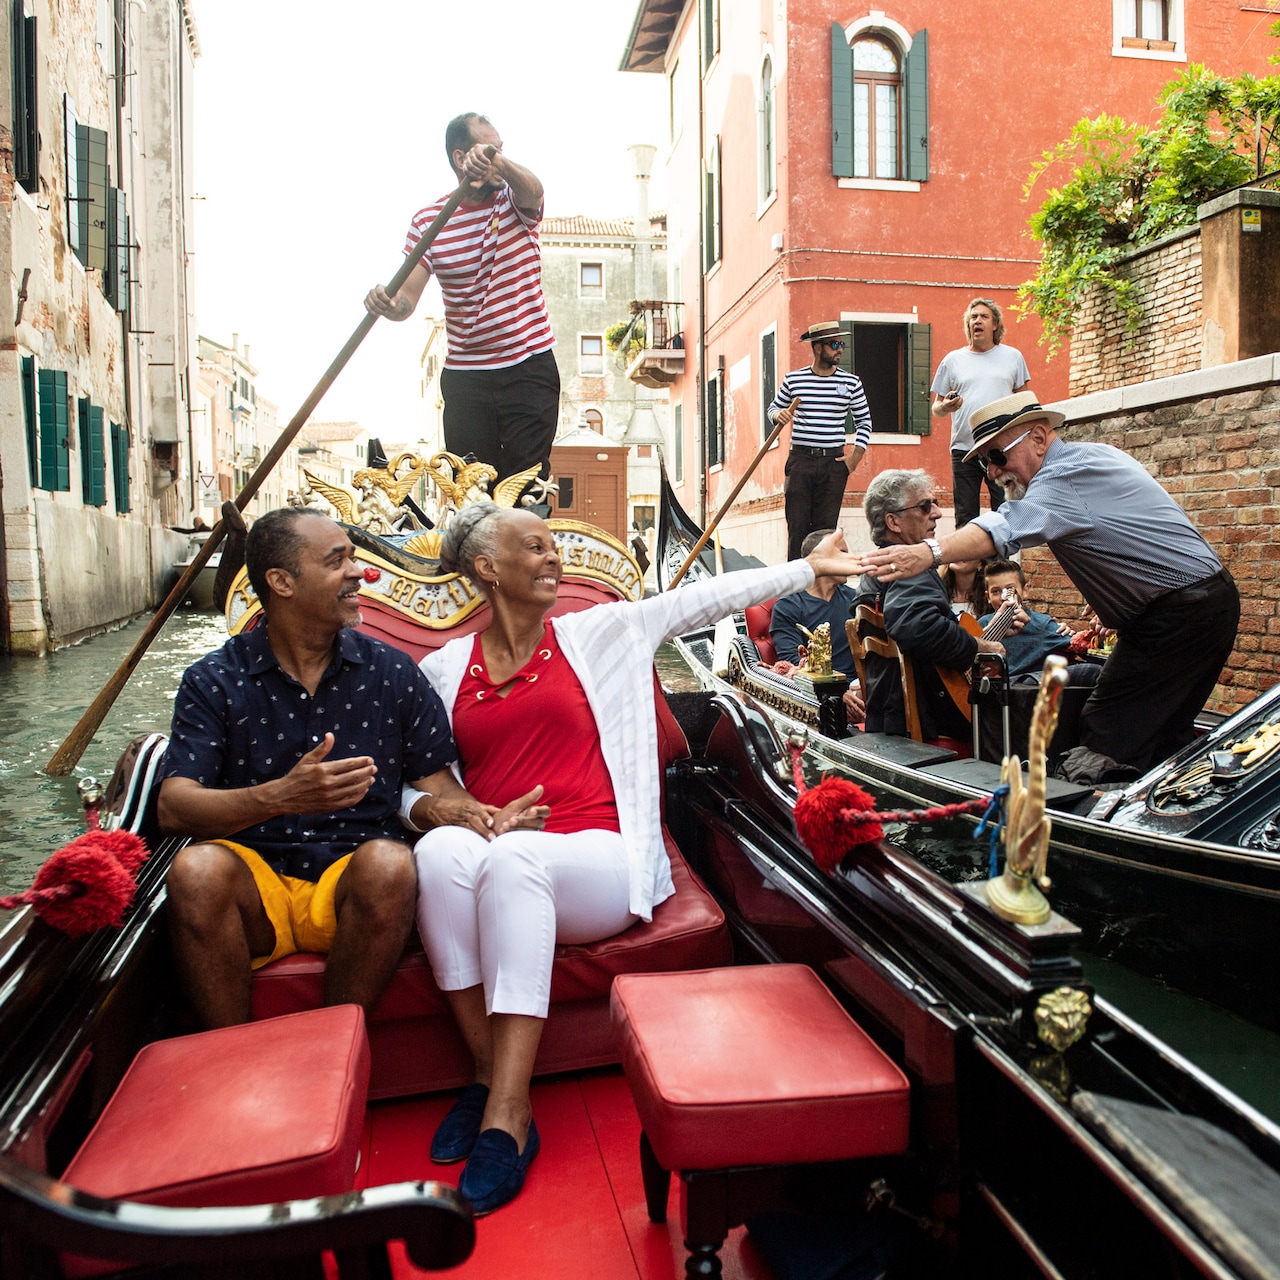 A gondolier rows a couple in a gondola who greet a man in a nearby boat on a canal in Venice, Italy